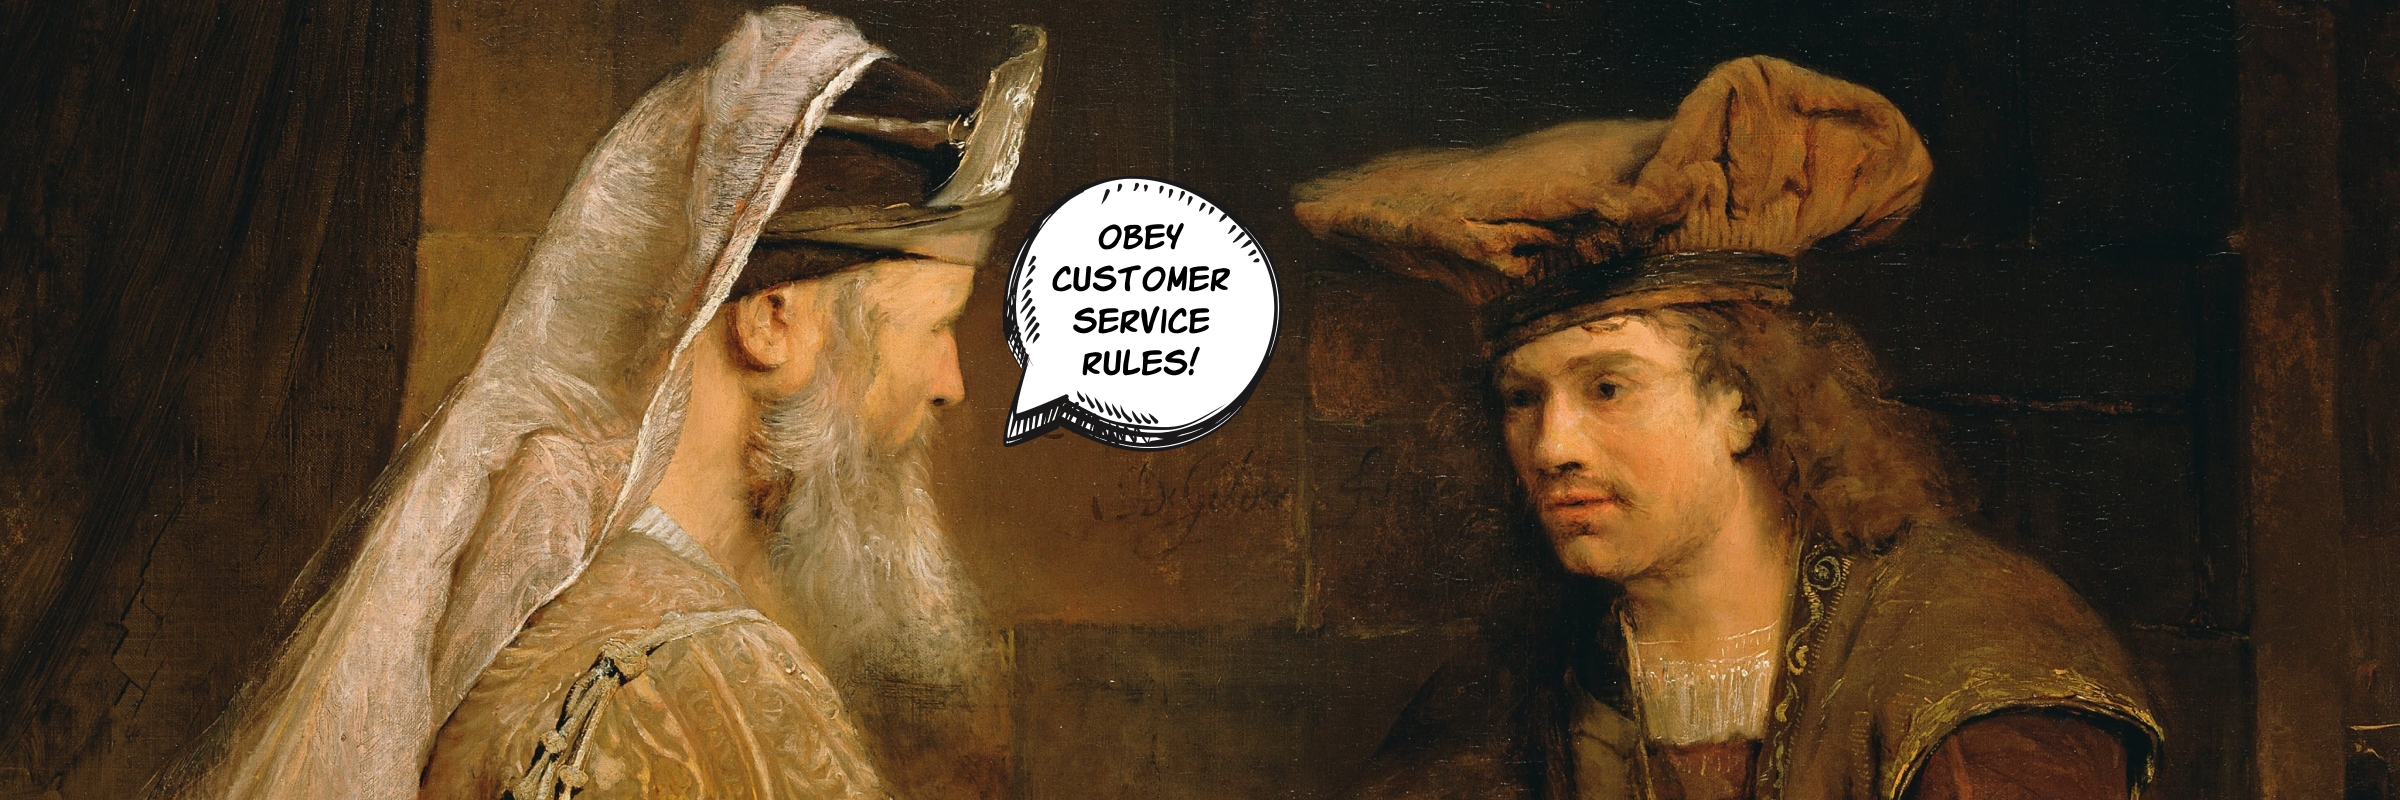 15 Tried-and-Tested Customer Service Rules to Stick to